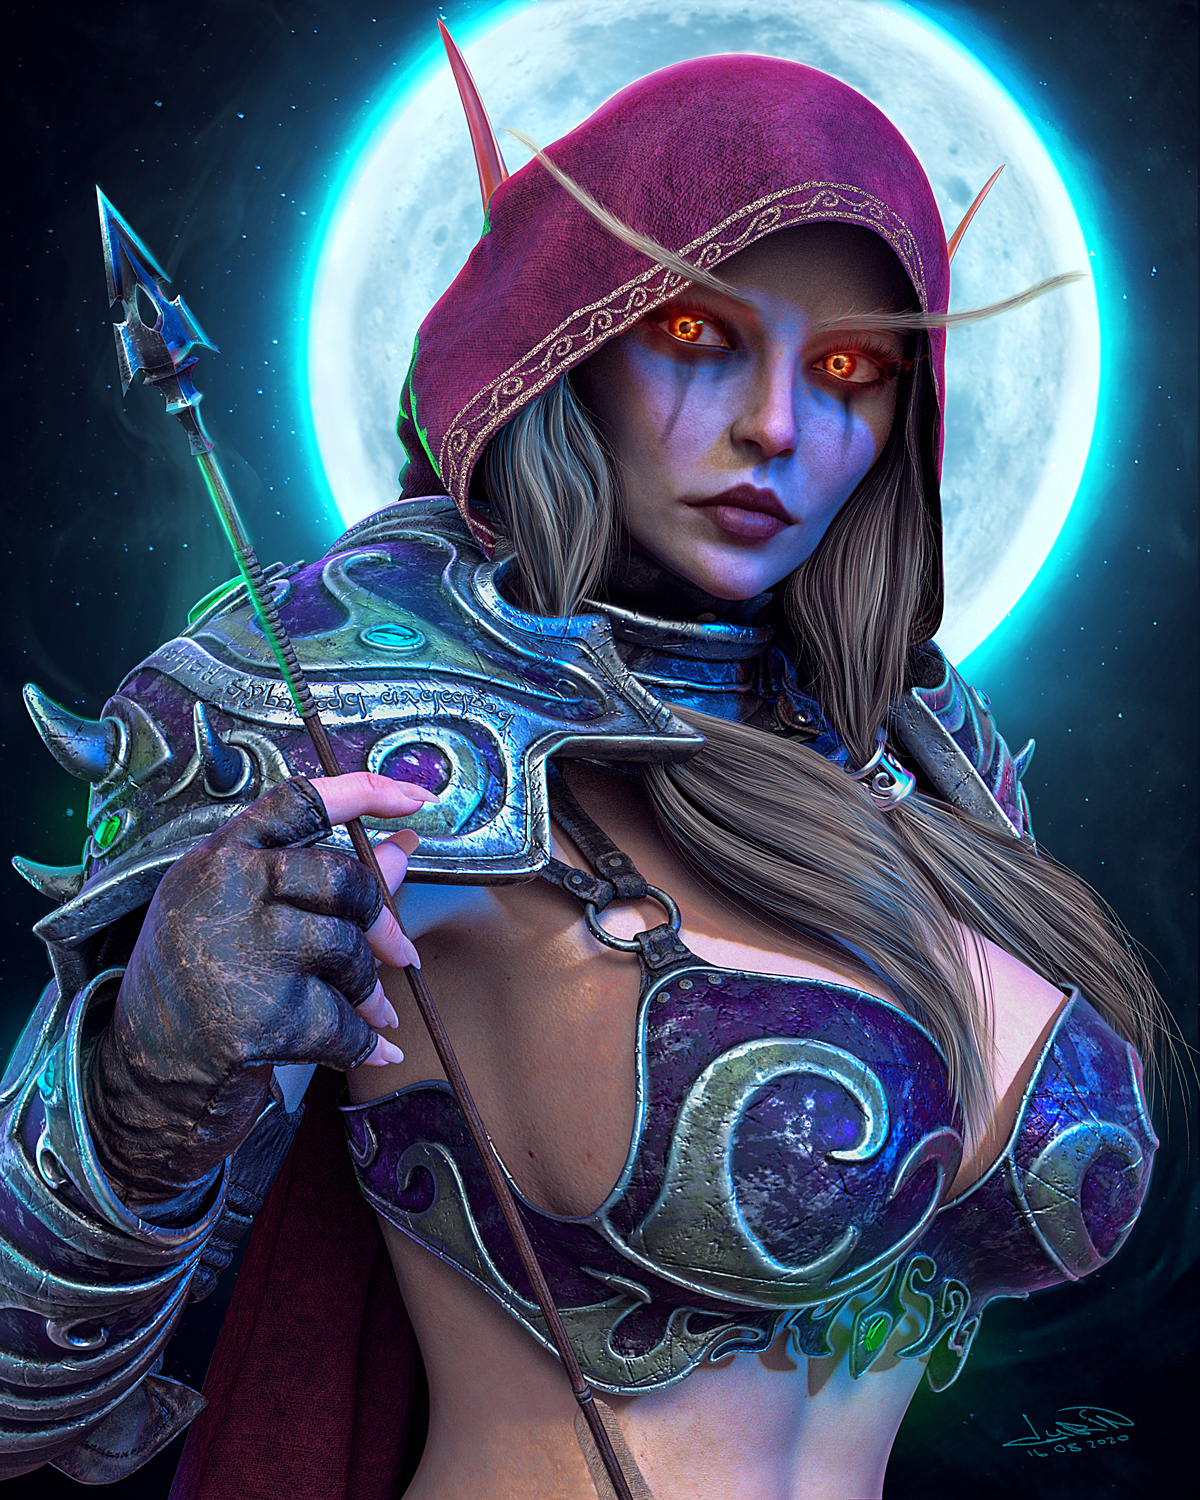 General 1200x1500 Sylvanas Windrunner Warcraft World of Warcraft: Battle for Azeroth pointy ears armor WOW 3 Moon looking at viewer cleavage magic lips Shockabuki portrait fan art Game CG game posters video games fantasy armor fantasy girl fantasy art artwork digital art big boobs